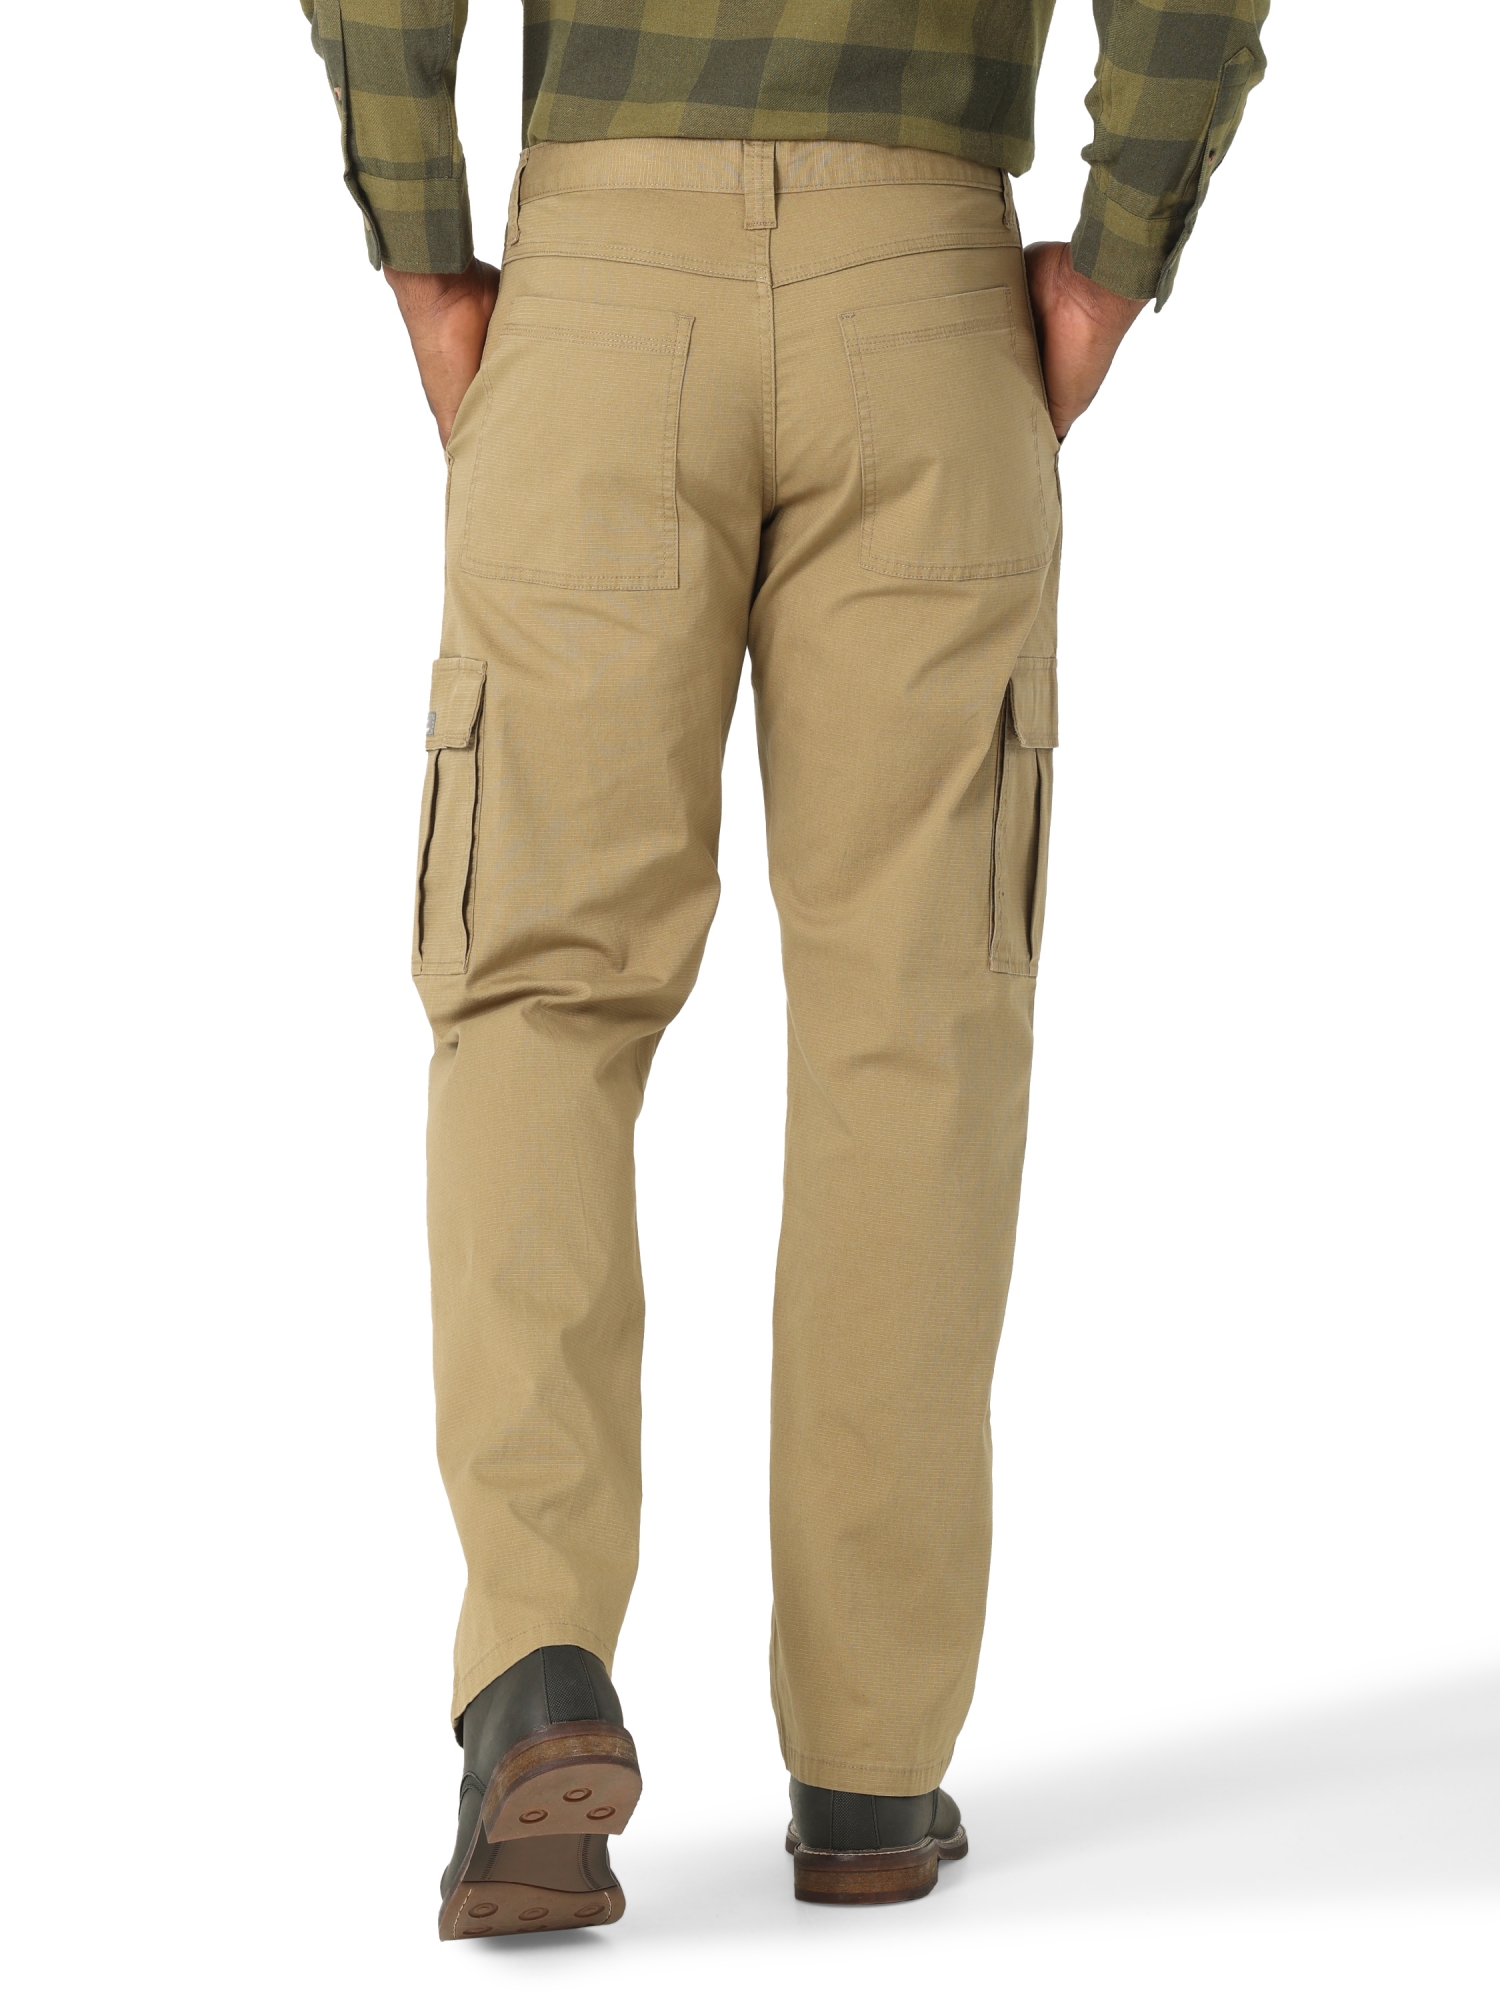 Wrangler Men's and Big Men's Relaxed Fit Legacy Cargo Pant - image 3 of 9